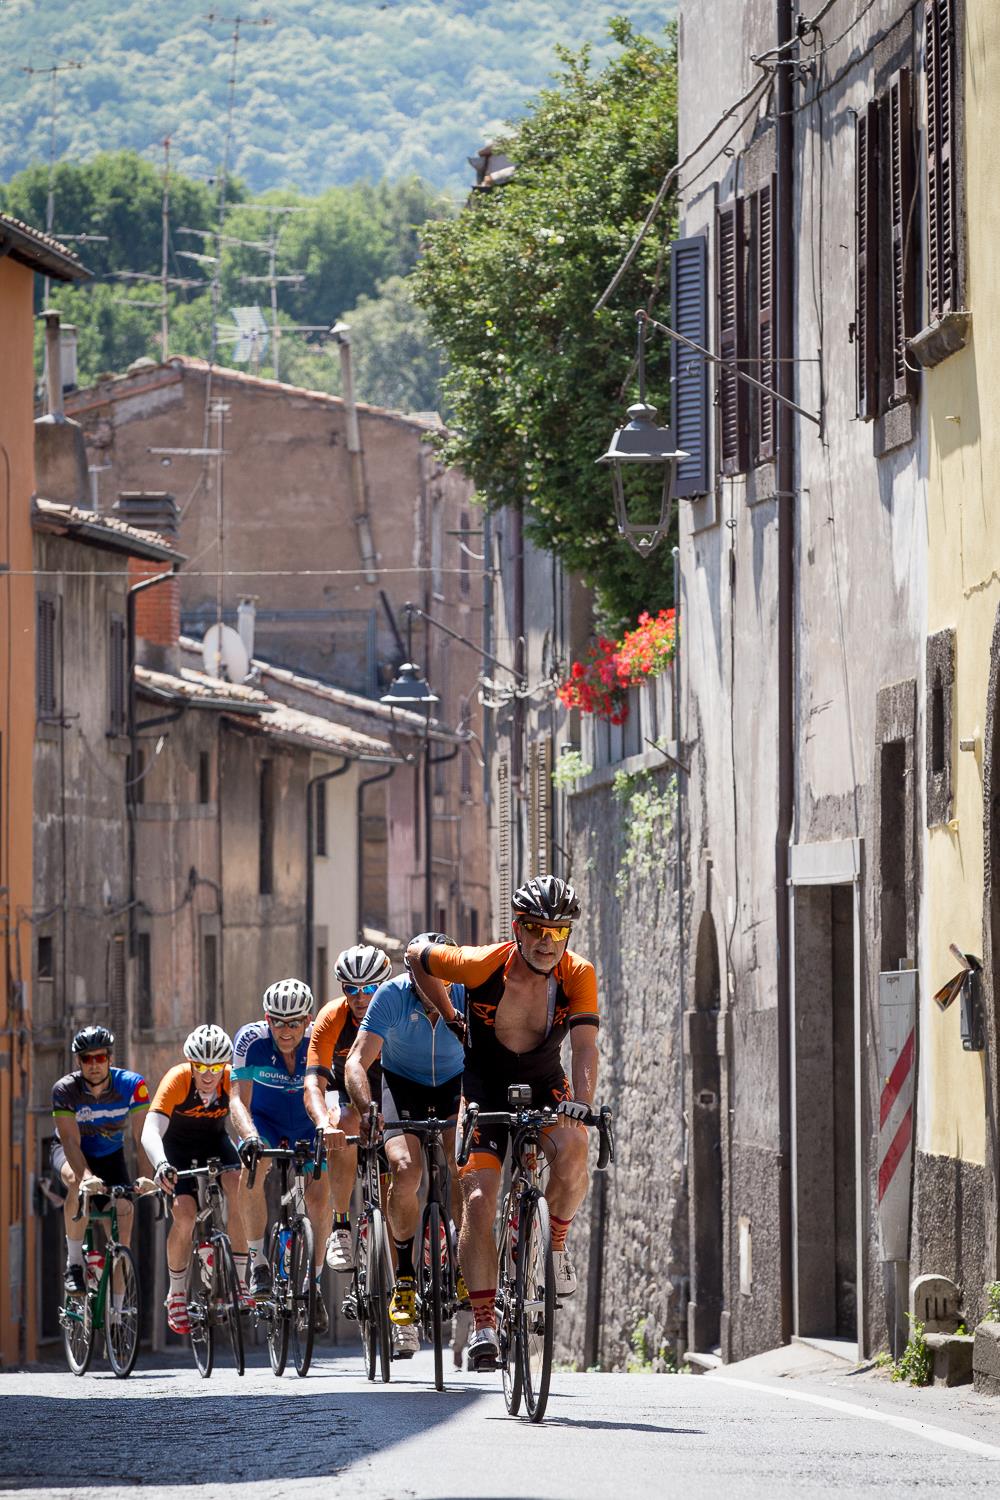 A group of cyclists riding through an Italian village